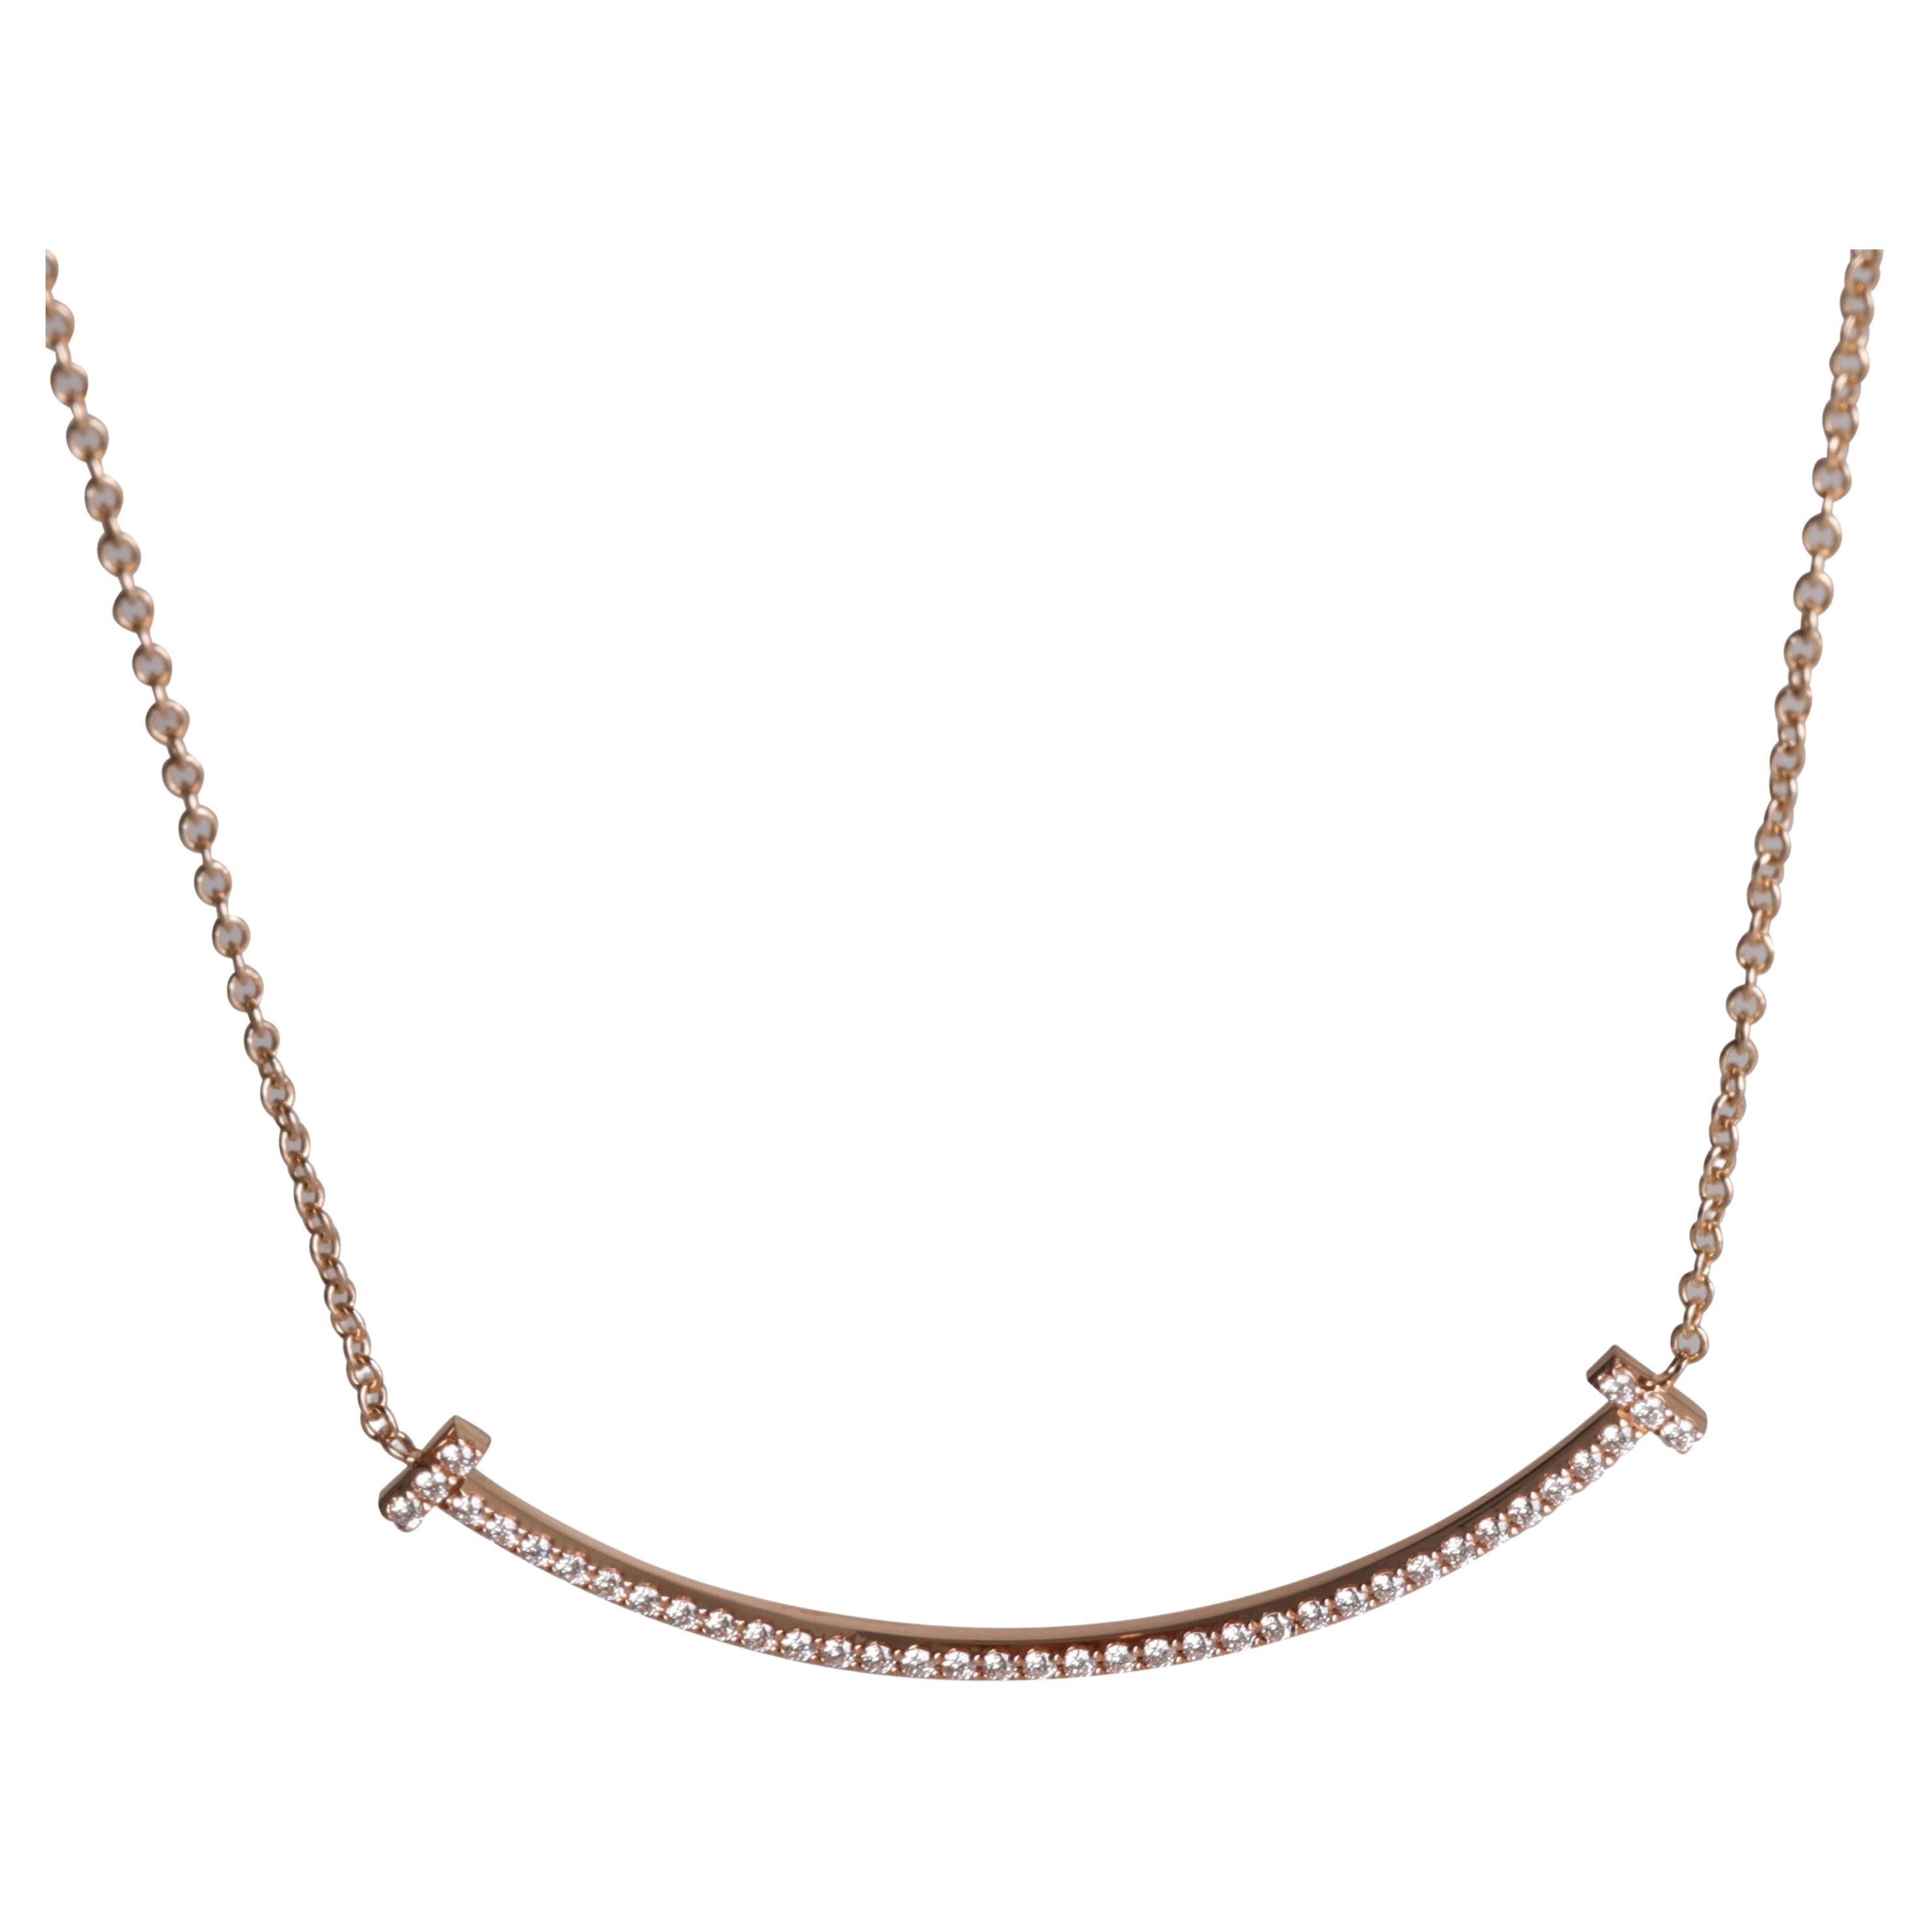 Tiffany & Co. Tiffany T Diamond Smile Necklace in 18k Yellow Gold 0.1 CTW